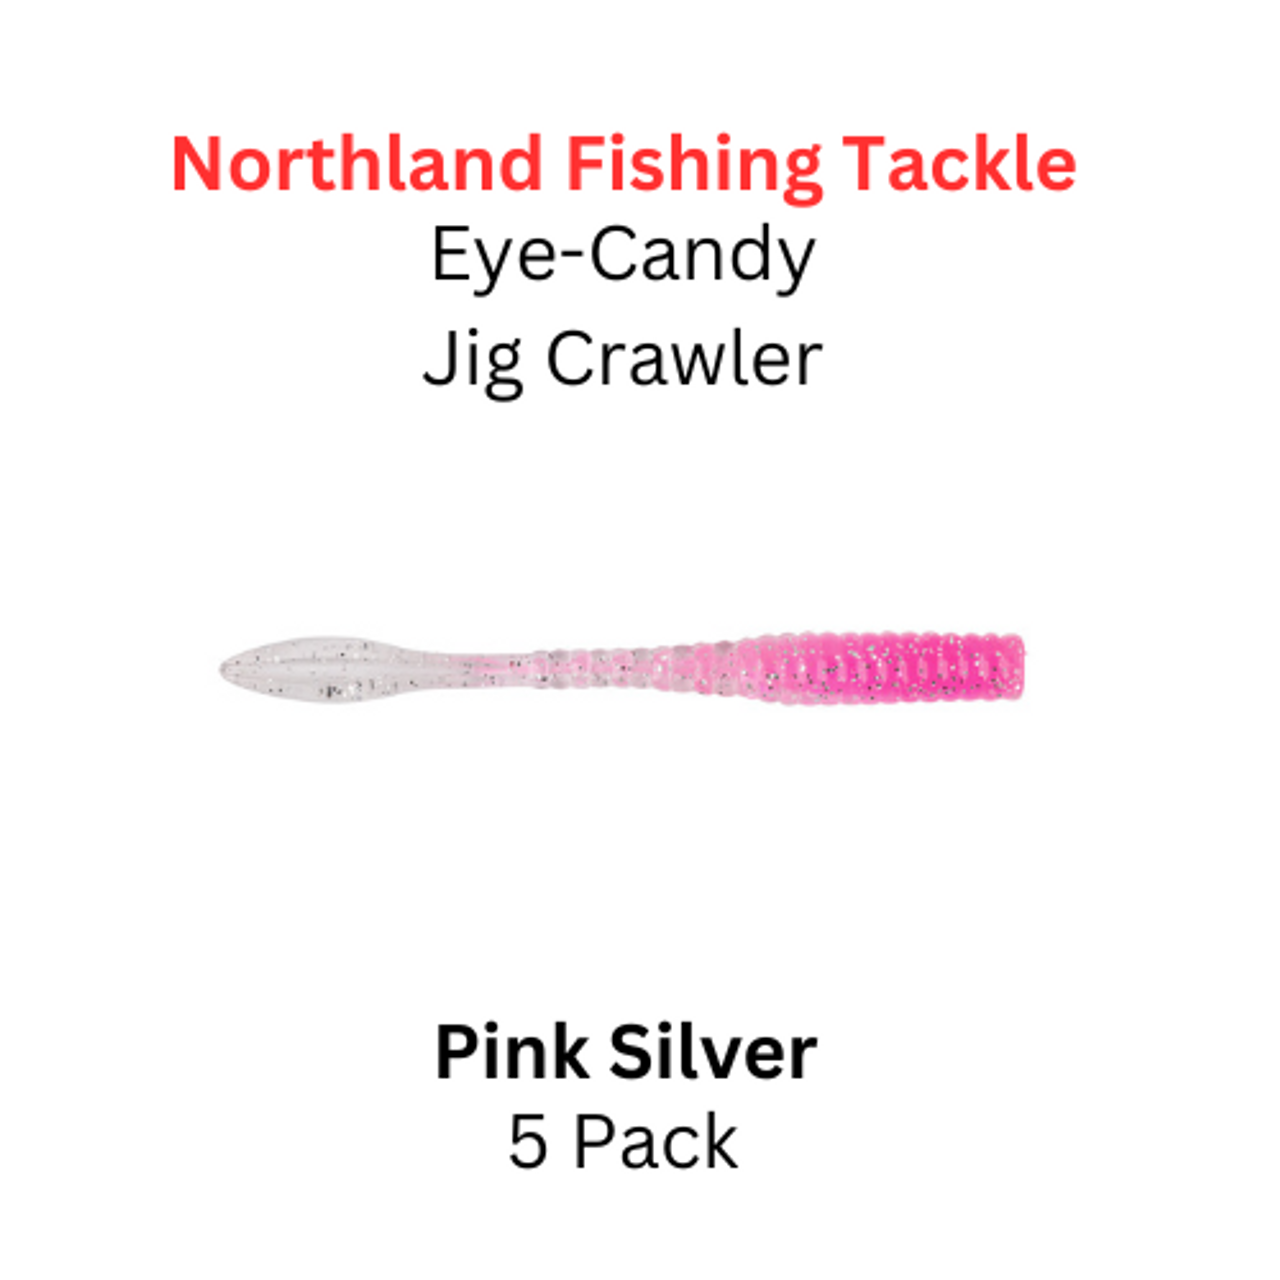 https://cdn11.bigcommerce.com/s-u9nbd/images/stencil/1280x1280/products/6639/16809/Northland_Fishing_Tackle_Eye_Candy_Jig_Crawler_Pink_silver___63905.1688747076.png?c=2